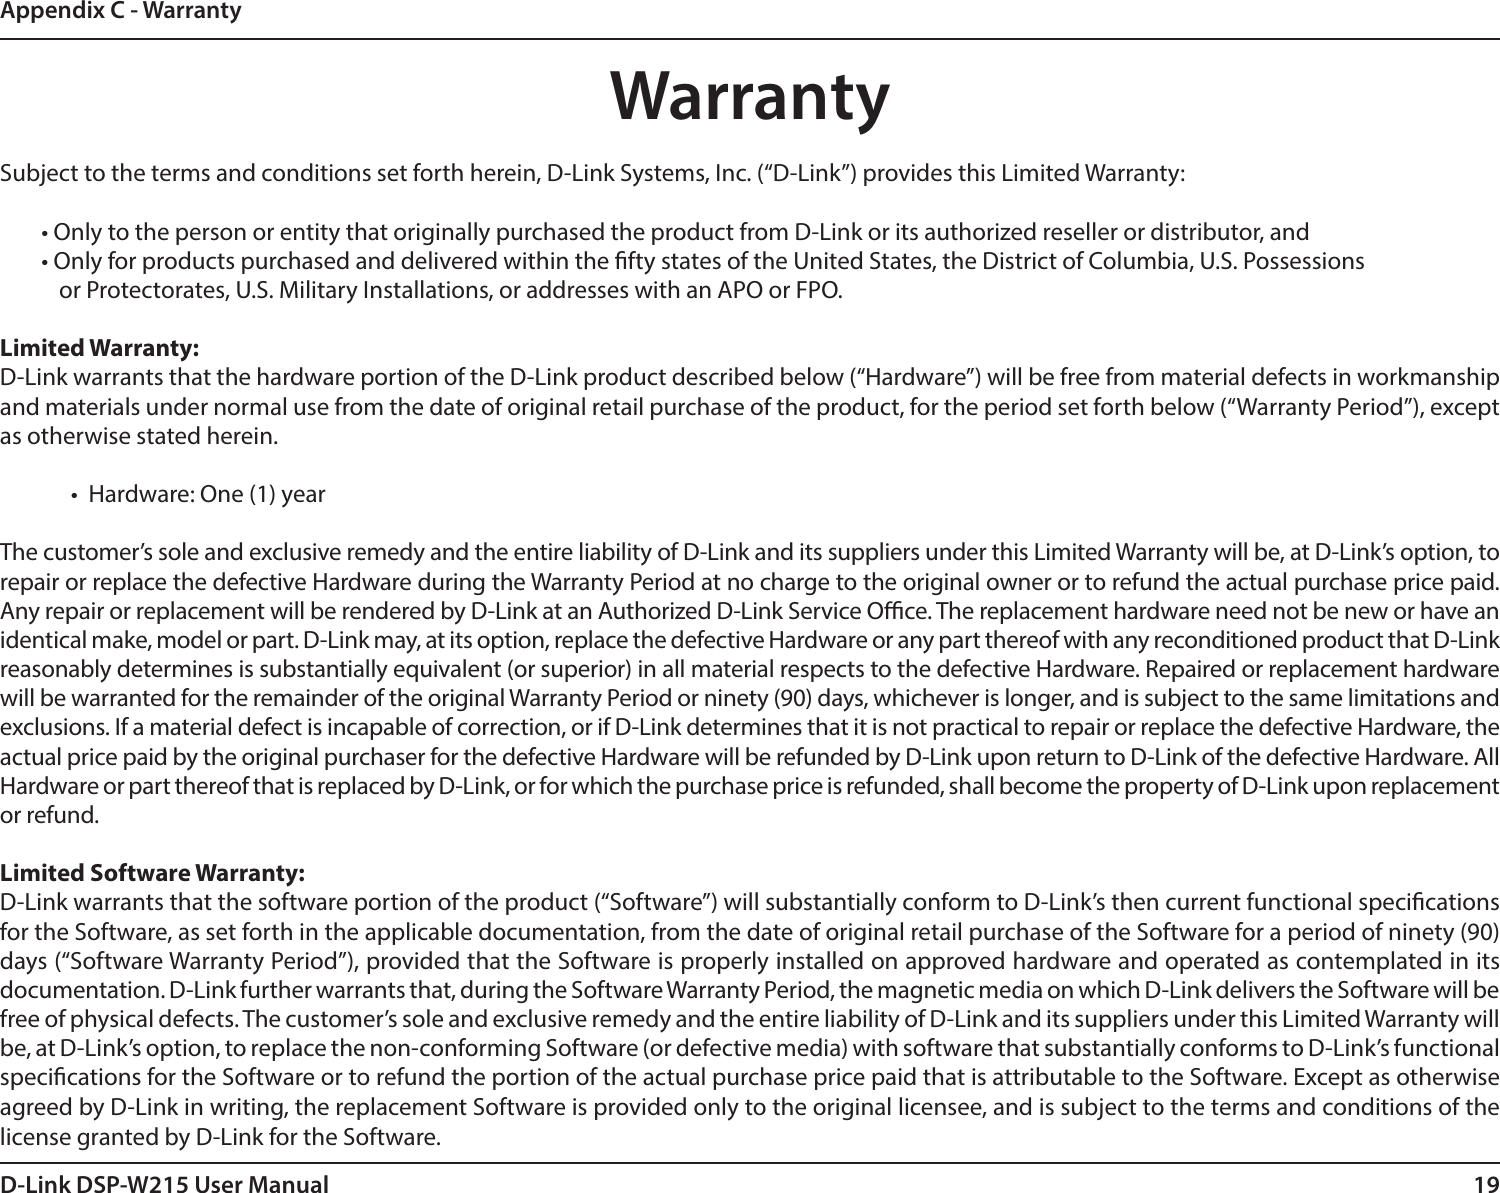 19D-Link DSP-W215 User ManualAppendix C - WarrantyWarrantySubject to the terms and conditions set forth herein, D-Link Systems, Inc. (“D-Link”) provides this Limited Warranty:• Only to the person or entity that originally purchased the product from D-Link or its authorized reseller or distributor, and• Only for products purchased and delivered within the fty states of the United States, the District of Columbia, U.S. Possessions        or Protectorates, U.S. Military Installations, or addresses with an APO or FPO.Limited Warranty:D-Link warrants that the hardware portion of the D-Link product described below (“Hardware”) will be free from material defects in workmanship and materials under normal use from the date of original retail purchase of the product, for the period set forth below (“Warranty Period”), except as otherwise stated herein.•  Hardware: One (1) yearThe customer’s sole and exclusive remedy and the entire liability of D-Link and its suppliers under this Limited Warranty will be, at D-Link’s option, to repair or replace the defective Hardware during the Warranty Period at no charge to the original owner or to refund the actual purchase price paid. Any repair or replacement will be rendered by D-Link at an Authorized D-Link Service Oce. The replacement hardware need not be new or have an identical make, model or part. D-Link may, at its option, replace the defective Hardware or any part thereof with any reconditioned product that D-Link reasonably determines is substantially equivalent (or superior) in all material respects to the defective Hardware. Repaired or replacement hardware will be warranted for the remainder of the original Warranty Period or ninety (90) days, whichever is longer, and is subject to the same limitations and exclusions. If a material defect is incapable of correction, or if D-Link determines that it is not practical to repair or replace the defective Hardware, the actual price paid by the original purchaser for the defective Hardware will be refunded by D-Link upon return to D-Link of the defective Hardware. All Hardware or part thereof that is replaced by D-Link, or for which the purchase price is refunded, shall become the property of D-Link upon replacement or refund.Limited Software Warranty:D-Link warrants that the software portion of the product (“Software”) will substantially conform to D-Link’s then current functional specications for the Software, as set forth in the applicable documentation, from the date of original retail purchase of the Software for a period of ninety (90) days (“Software Warranty Period”), provided that the Software is properly installed on approved hardware and operated as contemplated in its documentation. D-Link further warrants that, during the Software Warranty Period, the magnetic media on which D-Link delivers the Software will be free of physical defects. The customer’s sole and exclusive remedy and the entire liability of D-Link and its suppliers under this Limited Warranty will be, at D-Link’s option, to replace the non-conforming Software (or defective media) with software that substantially conforms to D-Link’s functional specications for the Software or to refund the portion of the actual purchase price paid that is attributable to the Software. Except as otherwise agreed by D-Link in writing, the replacement Software is provided only to the original licensee, and is subject to the terms and conditions of the license granted by D-Link for the Software. 